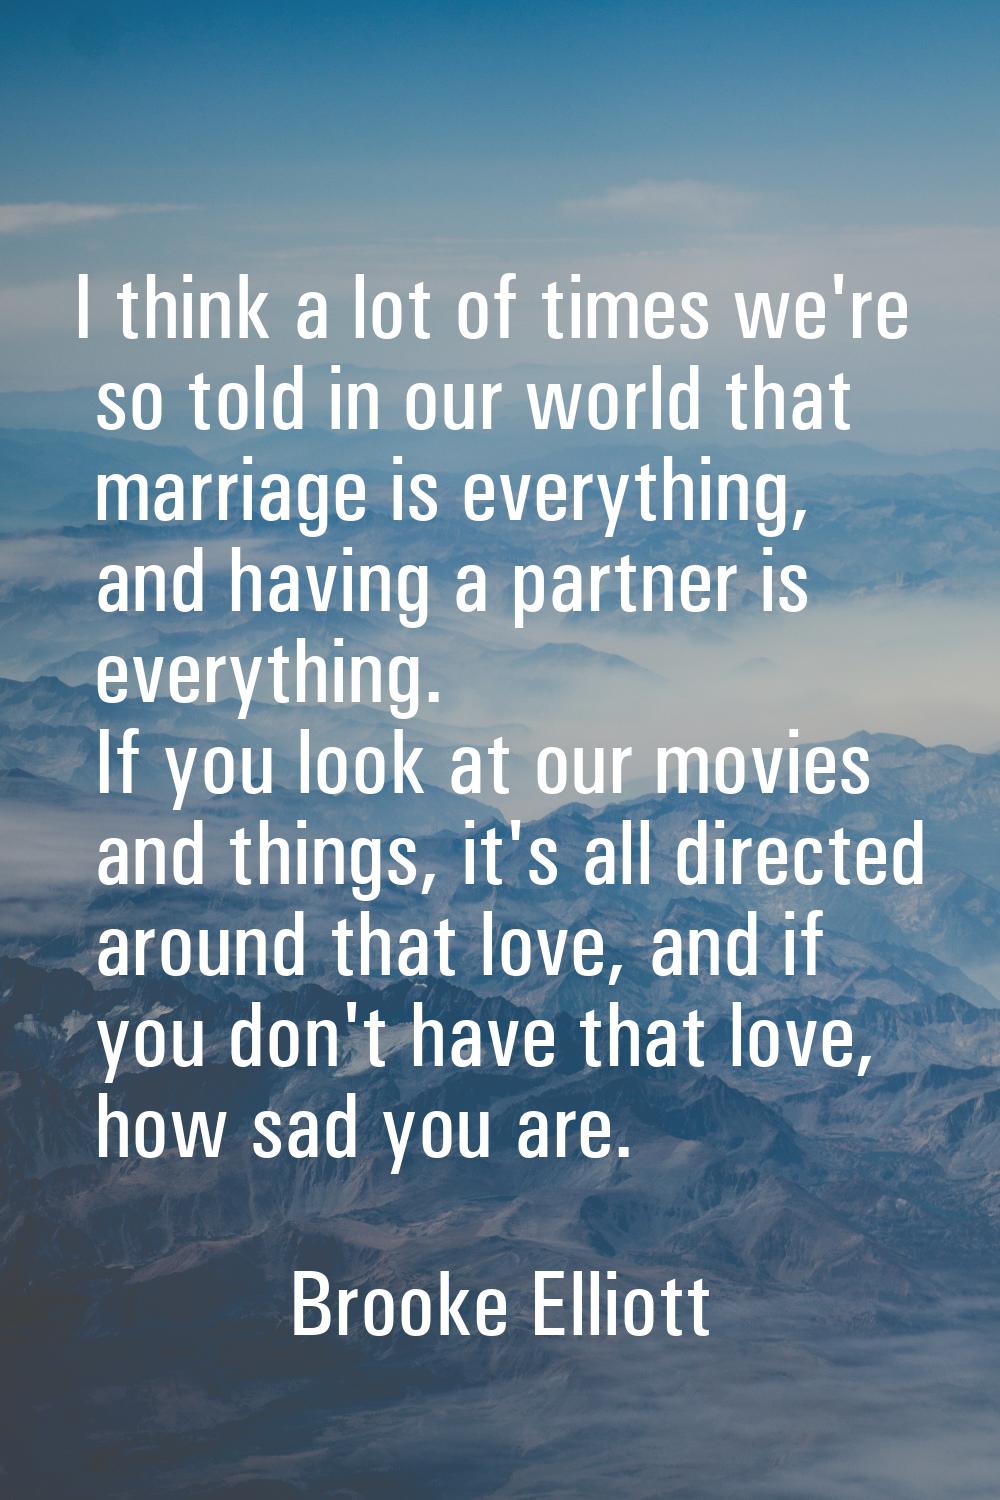 I think a lot of times we're so told in our world that marriage is everything, and having a partner